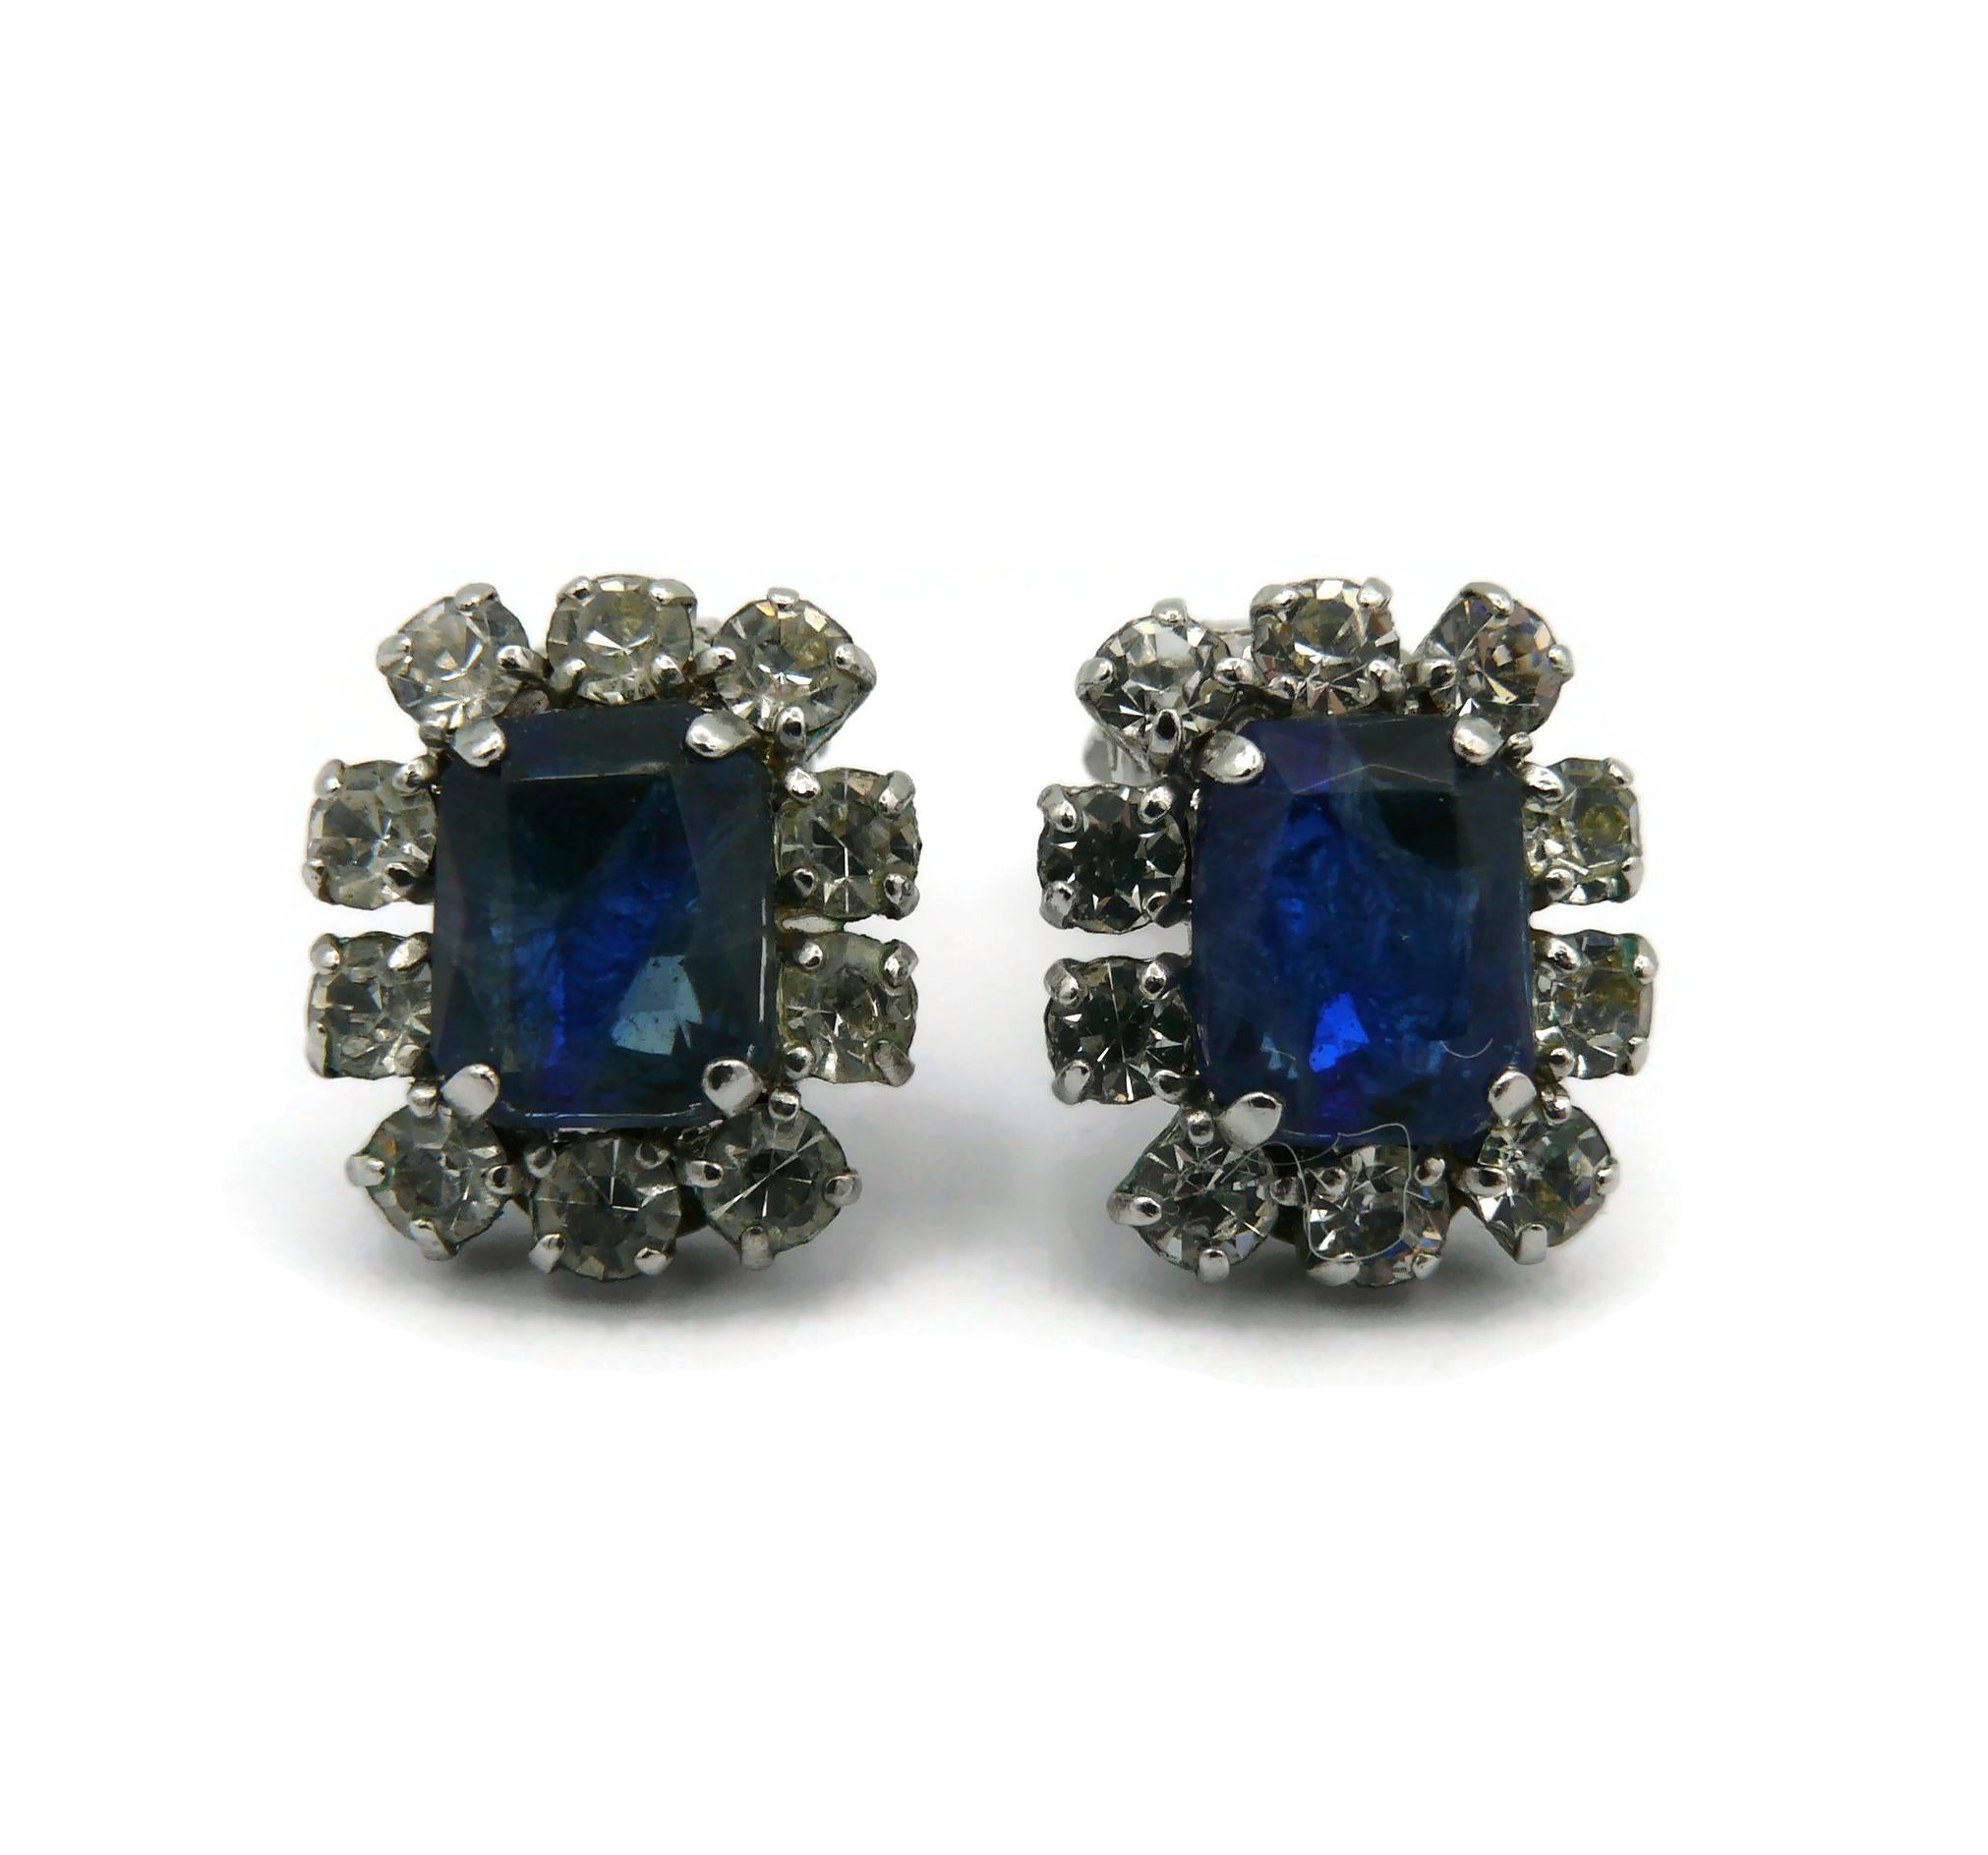 CHRISTIAN DIOR Vintage Jewelled Clip-On Earrings, 1970 For Sale 1